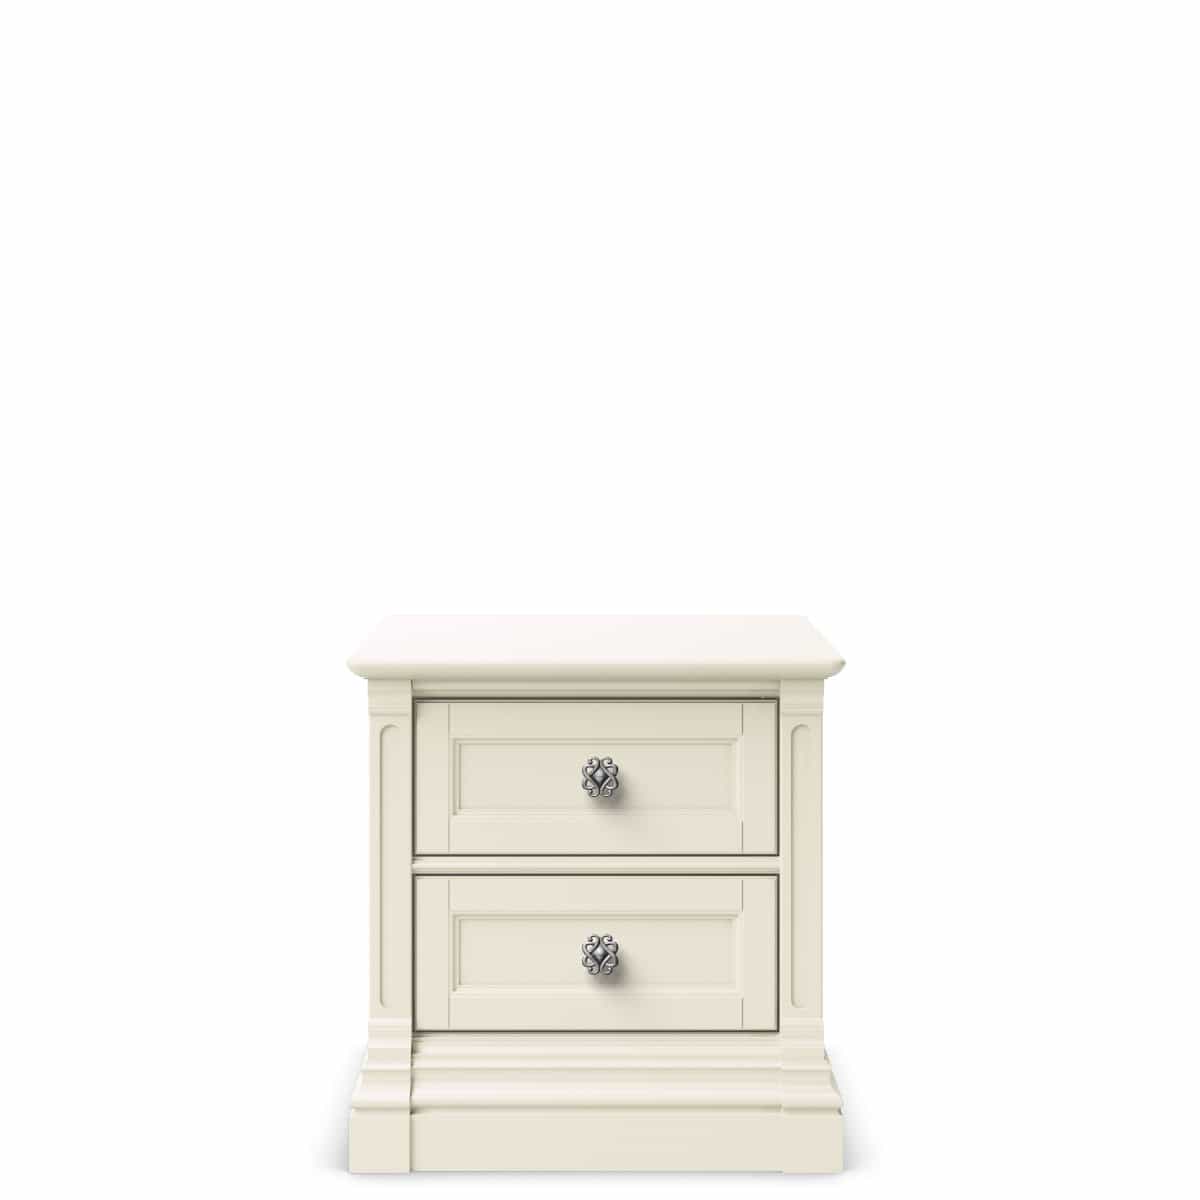 Imperio Nightstand